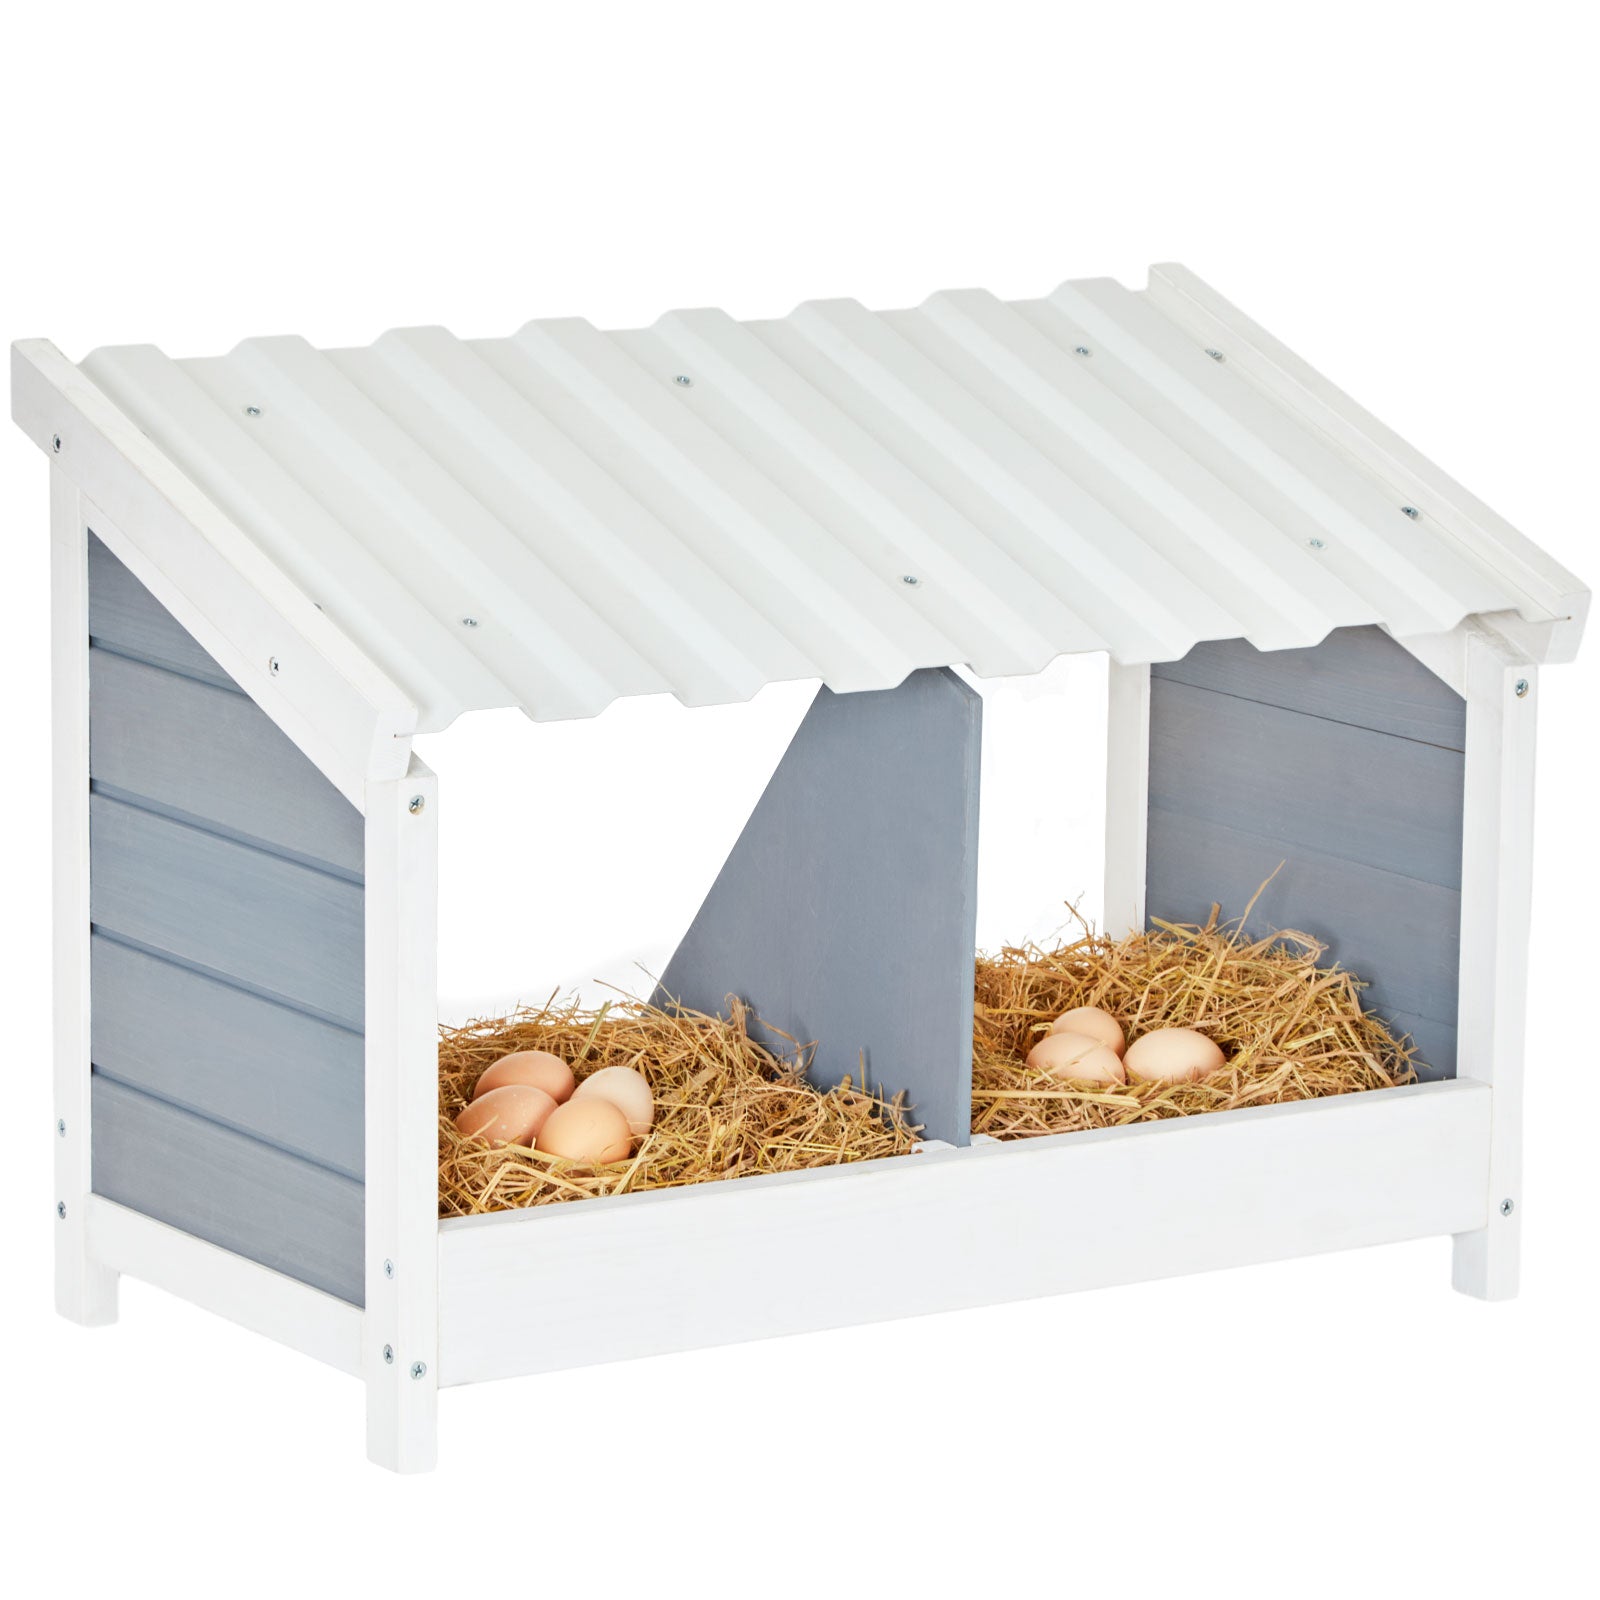 petsfit-double-pvc-roofed-nesting-boxes-heavy-duty-chicken-duck-poultry-laying-nests-essential-coop-accessory-01